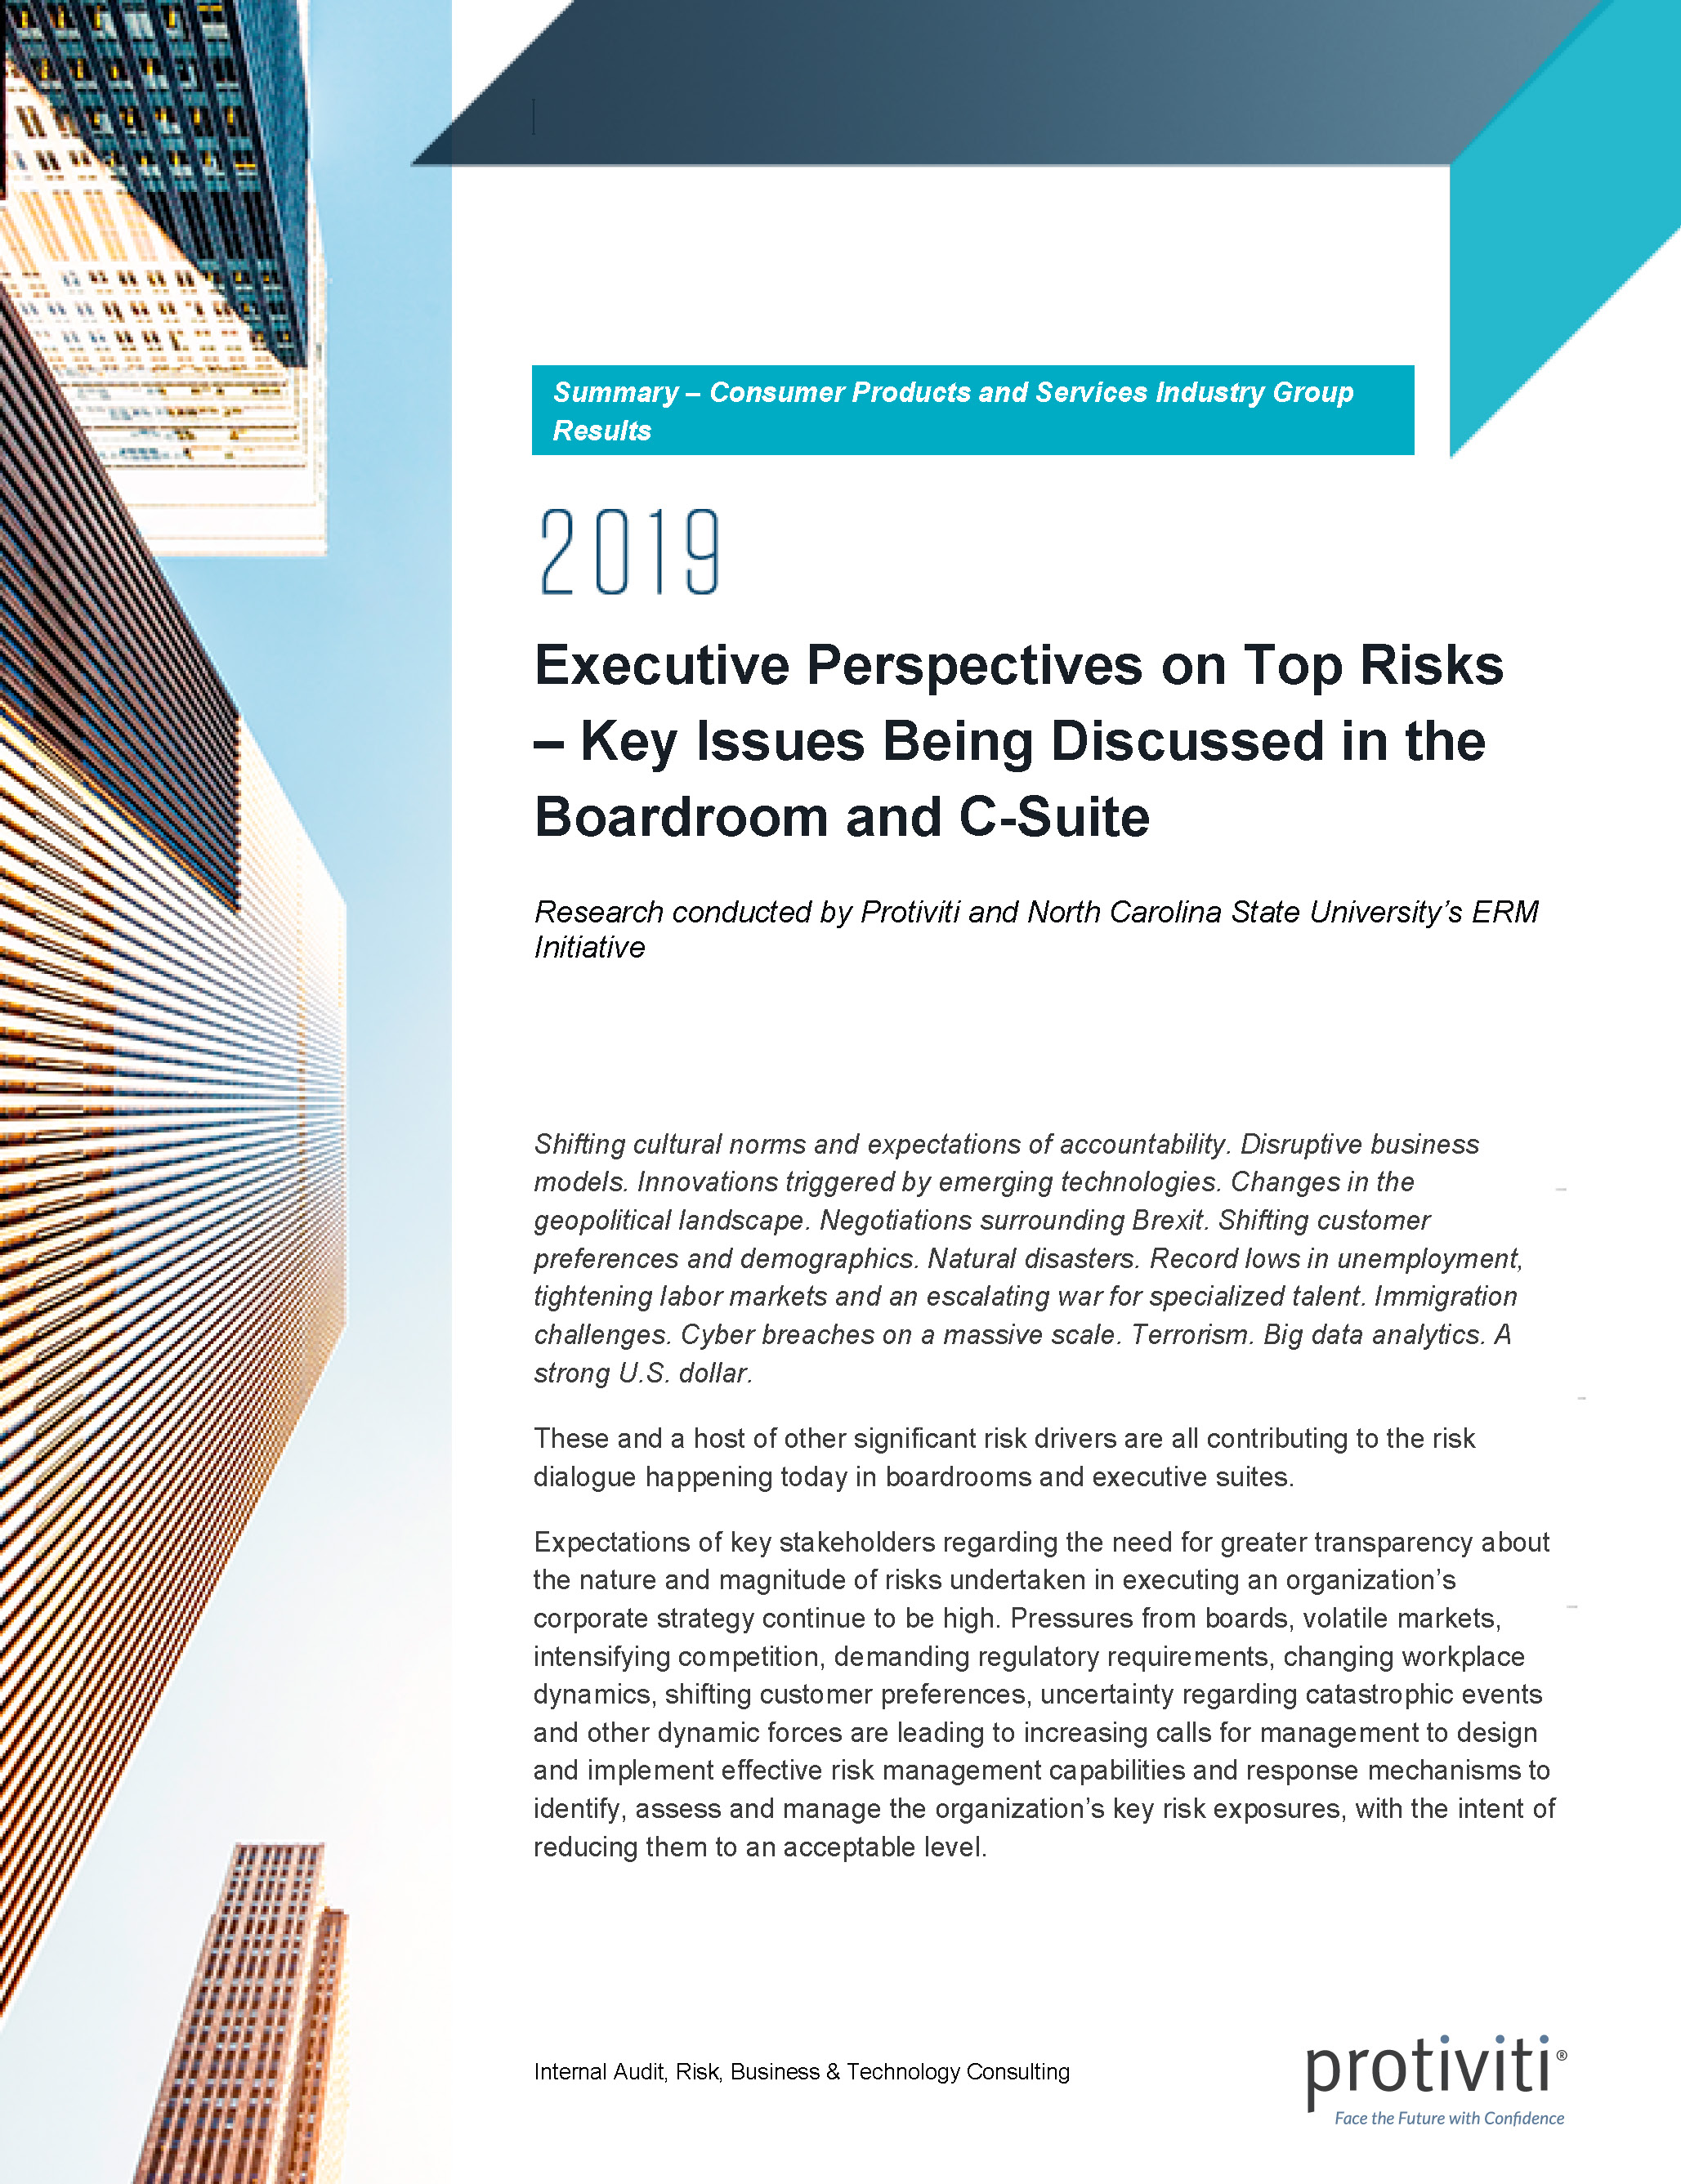 Screenshot of the first page of Executive Perspectives on Top Risks in 2019 Consumer Products and Services Industry Group Results